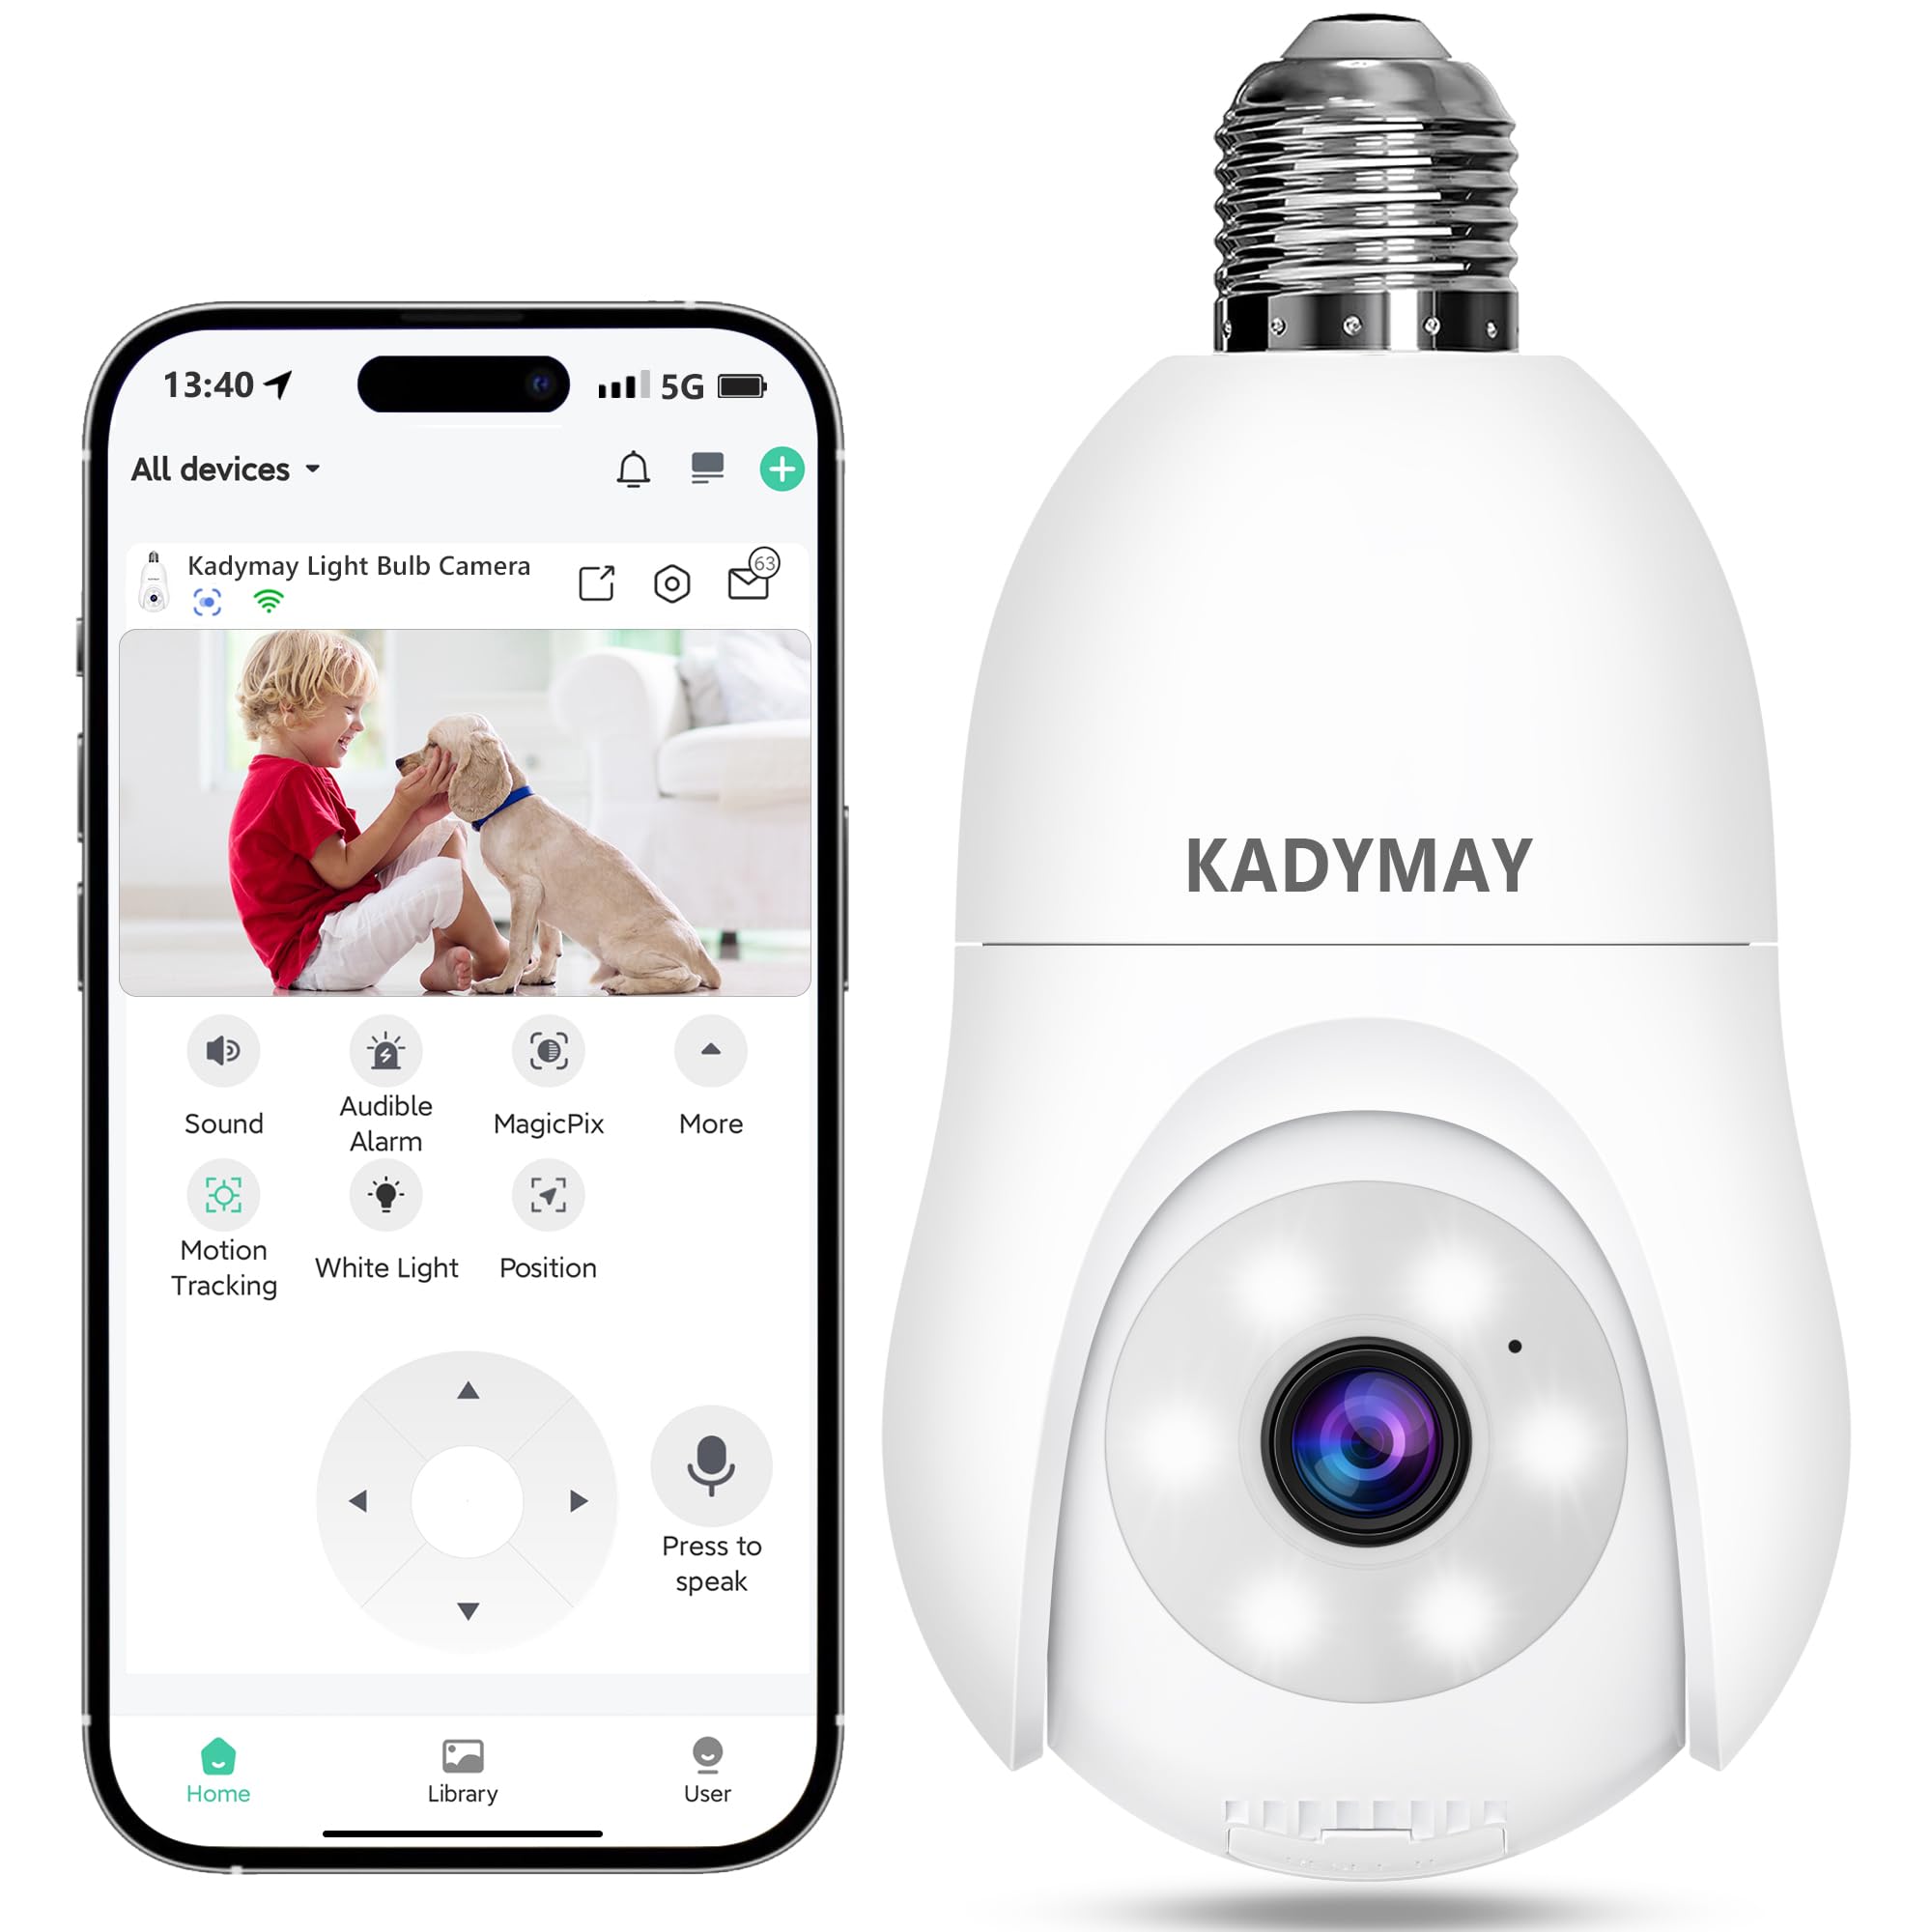 Kadymay 2K Light Bulb Security Camera, 2.4G WiFi 360° Screw in E27 Light Socket Camera Lightbulb Outdoor/Indoor, Smart 2-Way Audio Light Bulb Camera with Motion Detection and Auto Tracking